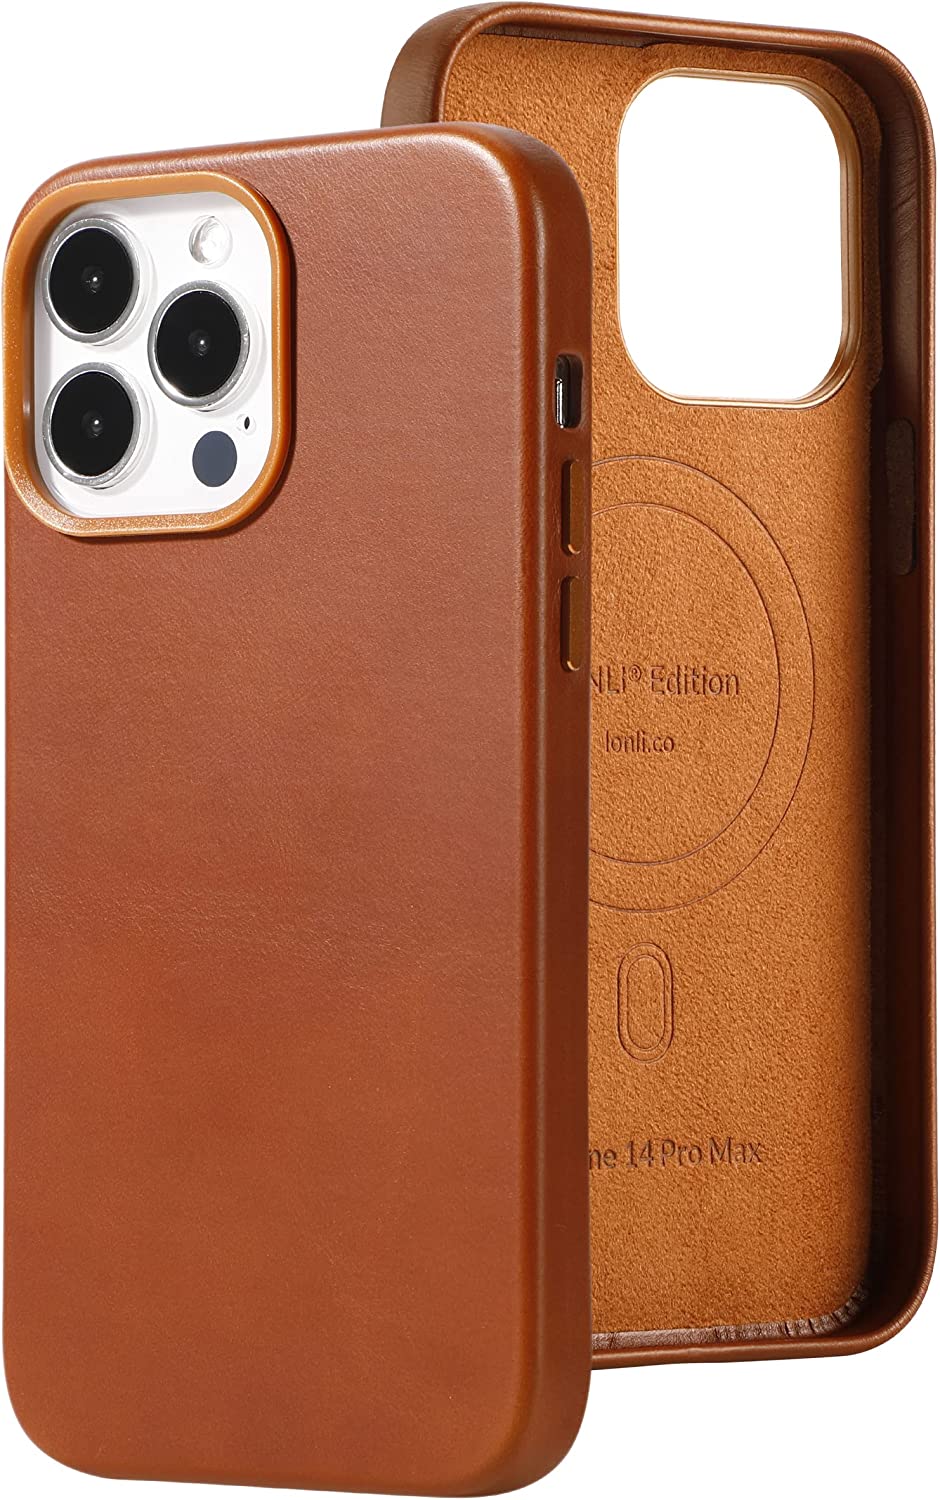 iPhone 14 Pro Max and Orange Leather Case Unboxing 